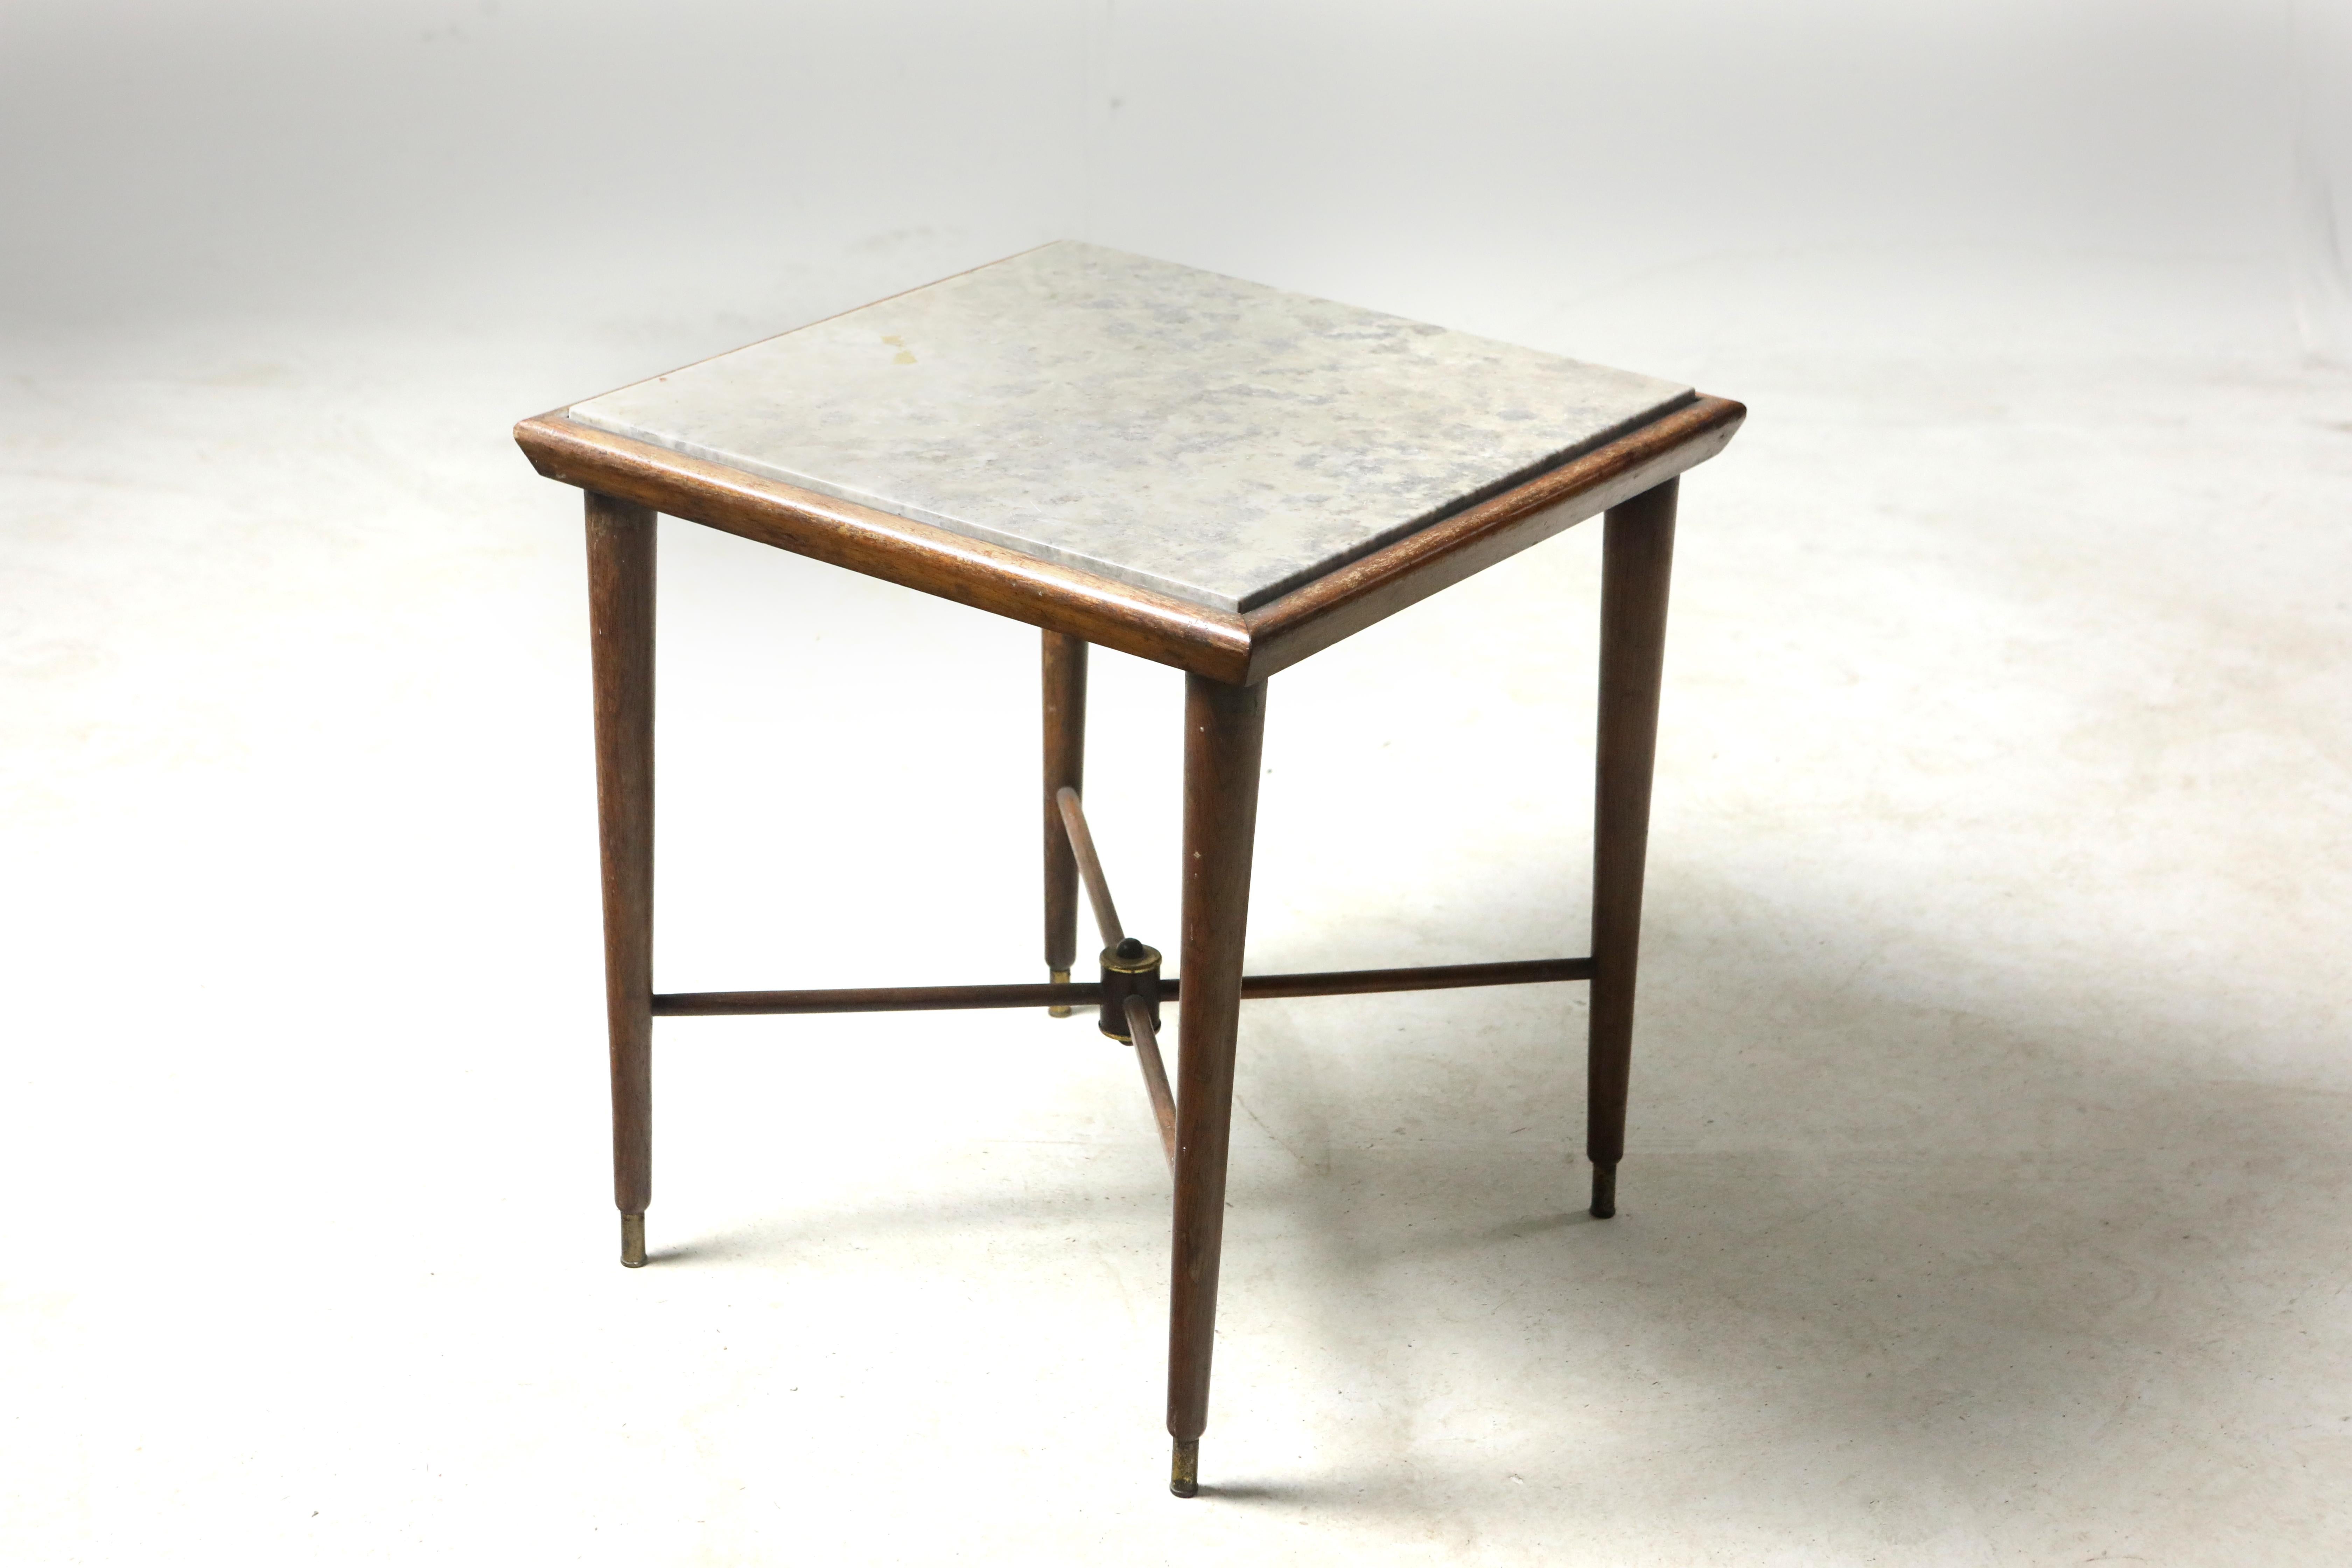 Mid-Century Modern marble-top side table by Giuseppe Scapinelli, Brazil, 1950s.

This elegant side table is a 1950s creation by Giuseppe Scapinelli. Structured in solid caviúna wood, this piece features a Brazilian marble (gray granite) tabletop